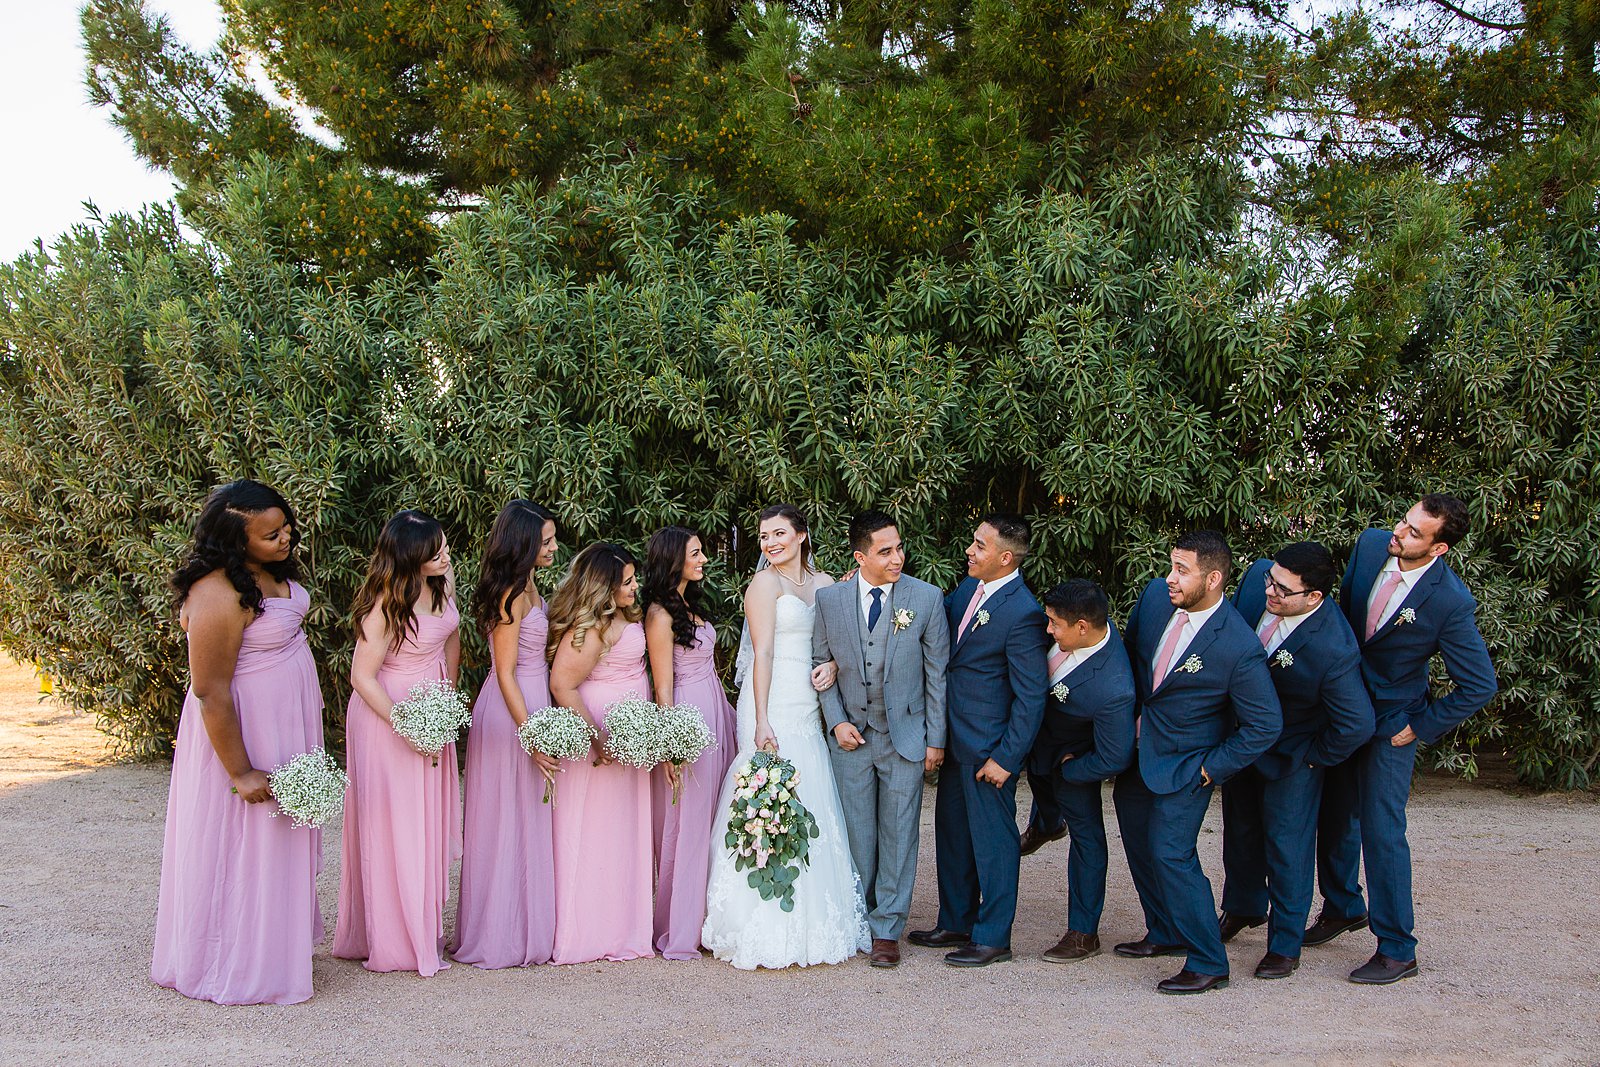 Bridal party having fun together at Schnepf Farms weding by Arizona wedding photographer PMA Photography.